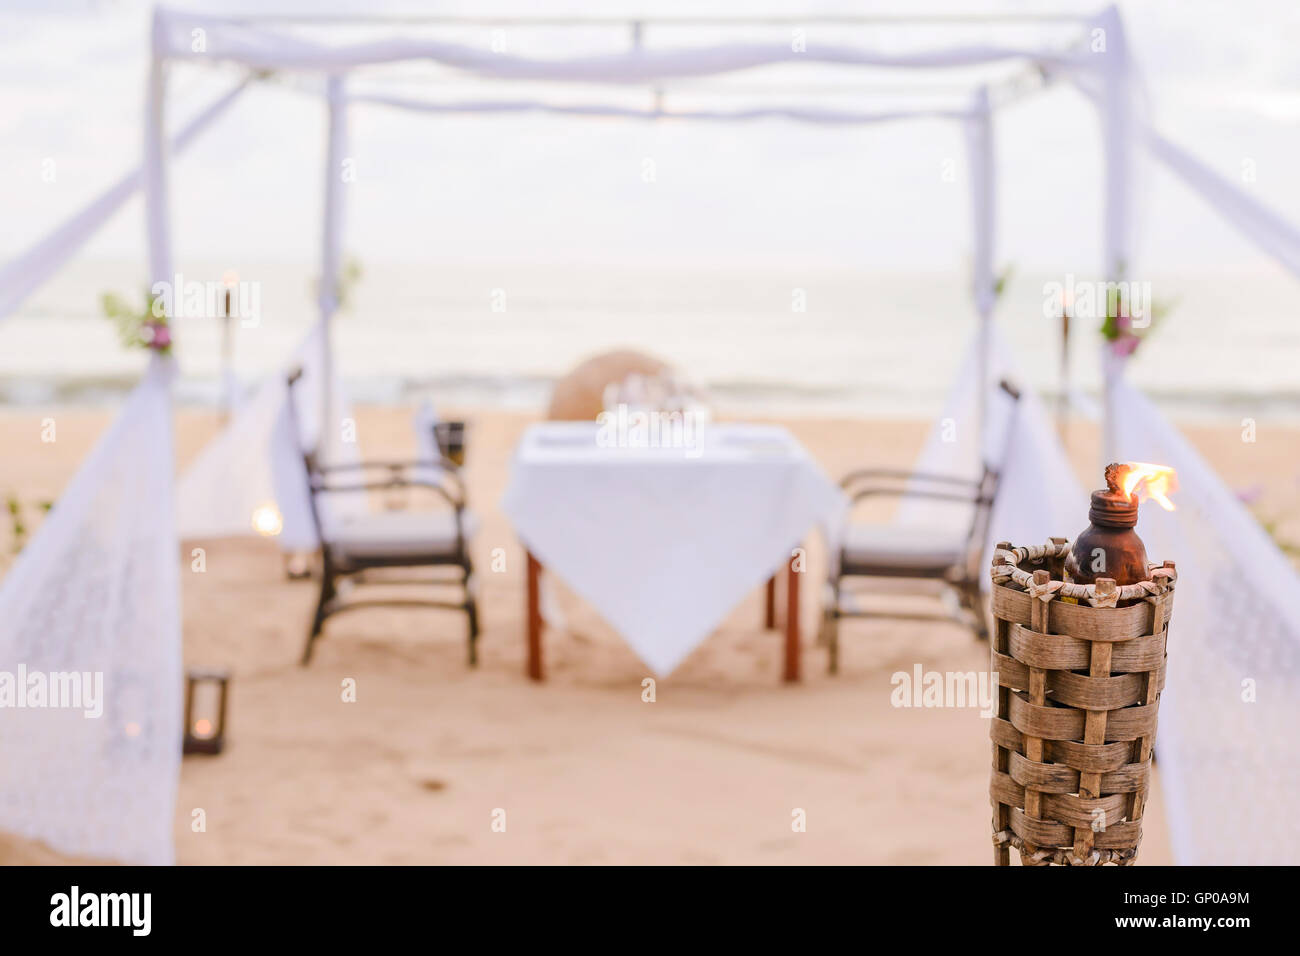 Blurry romantic dinner table setting on the beach at sunset. Focus on torch. Stock Photo